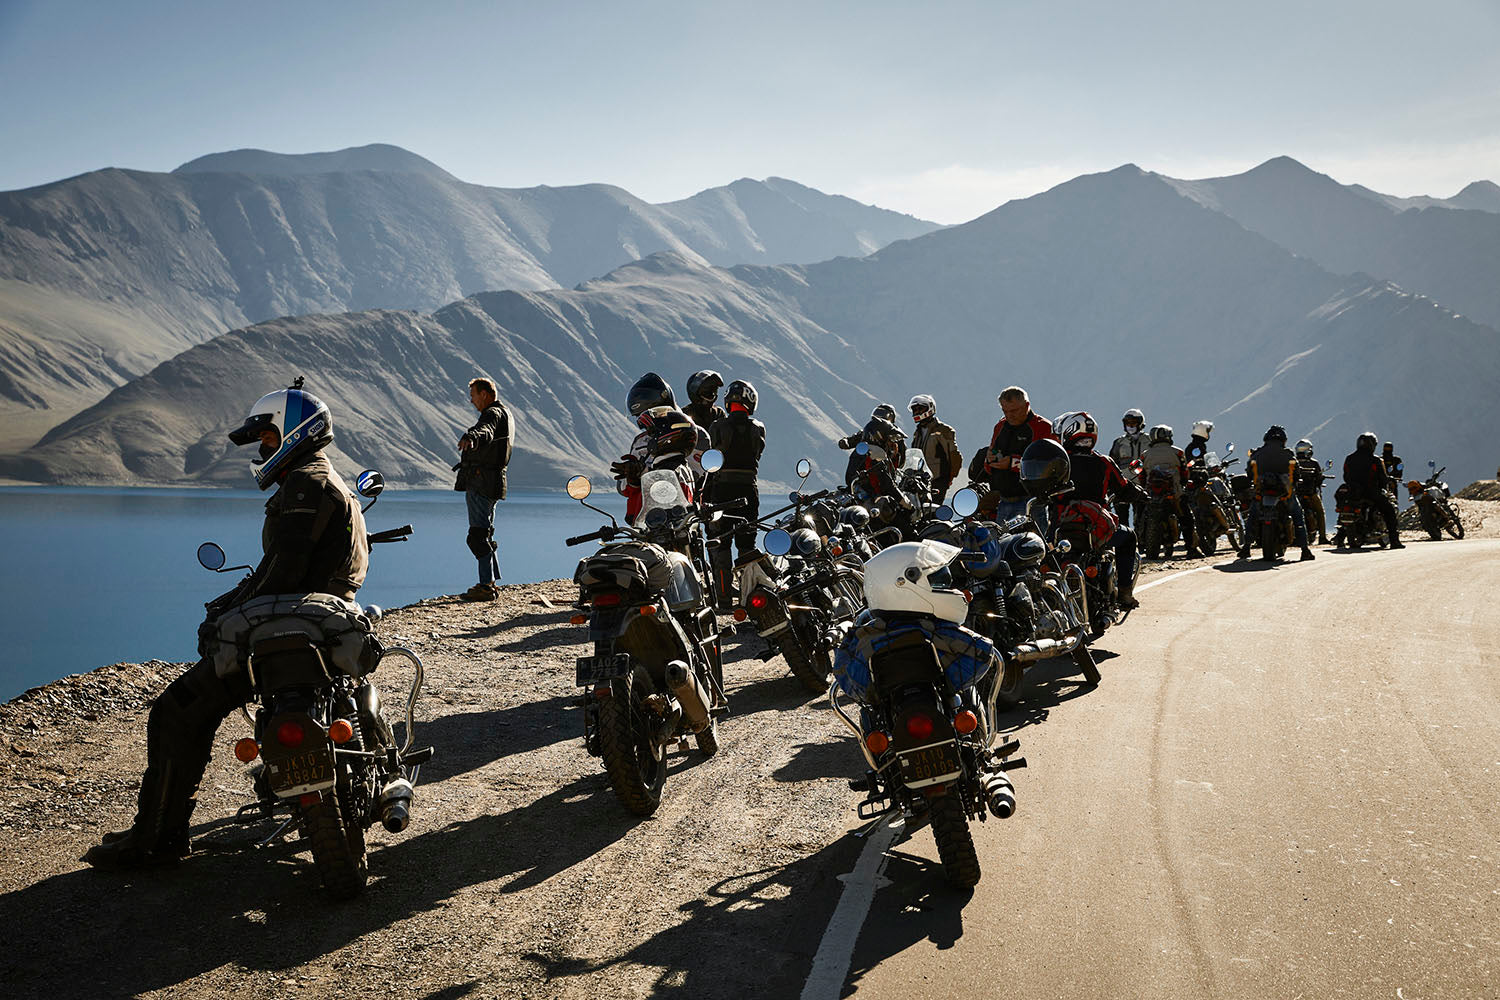 Motorcycle group traveling in the Himalayas